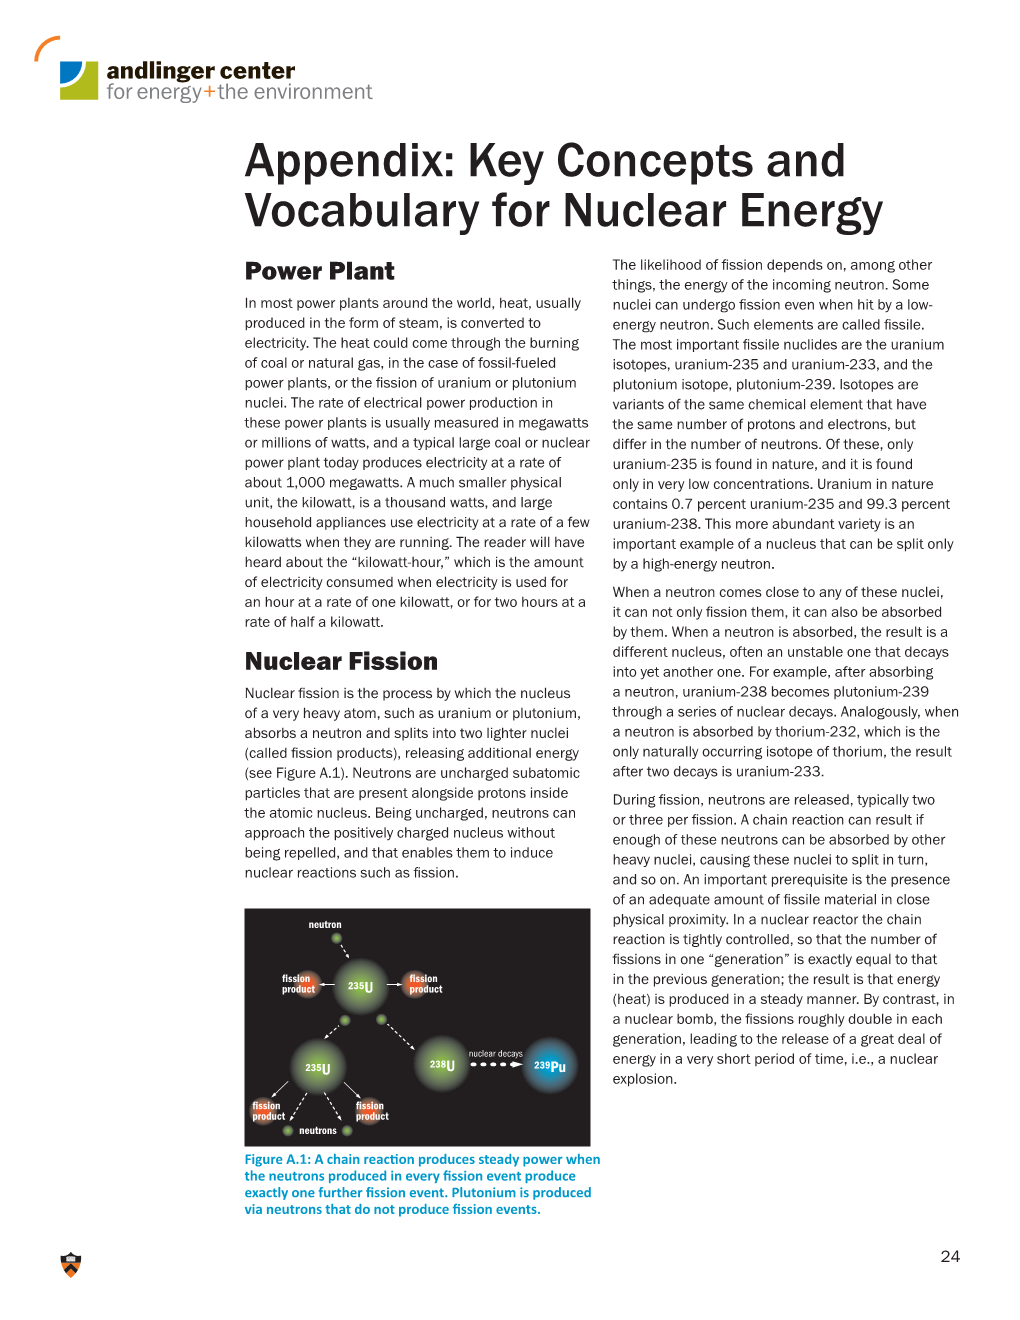 Appendix: Key Concepts and Vocabulary for Nuclear Energy